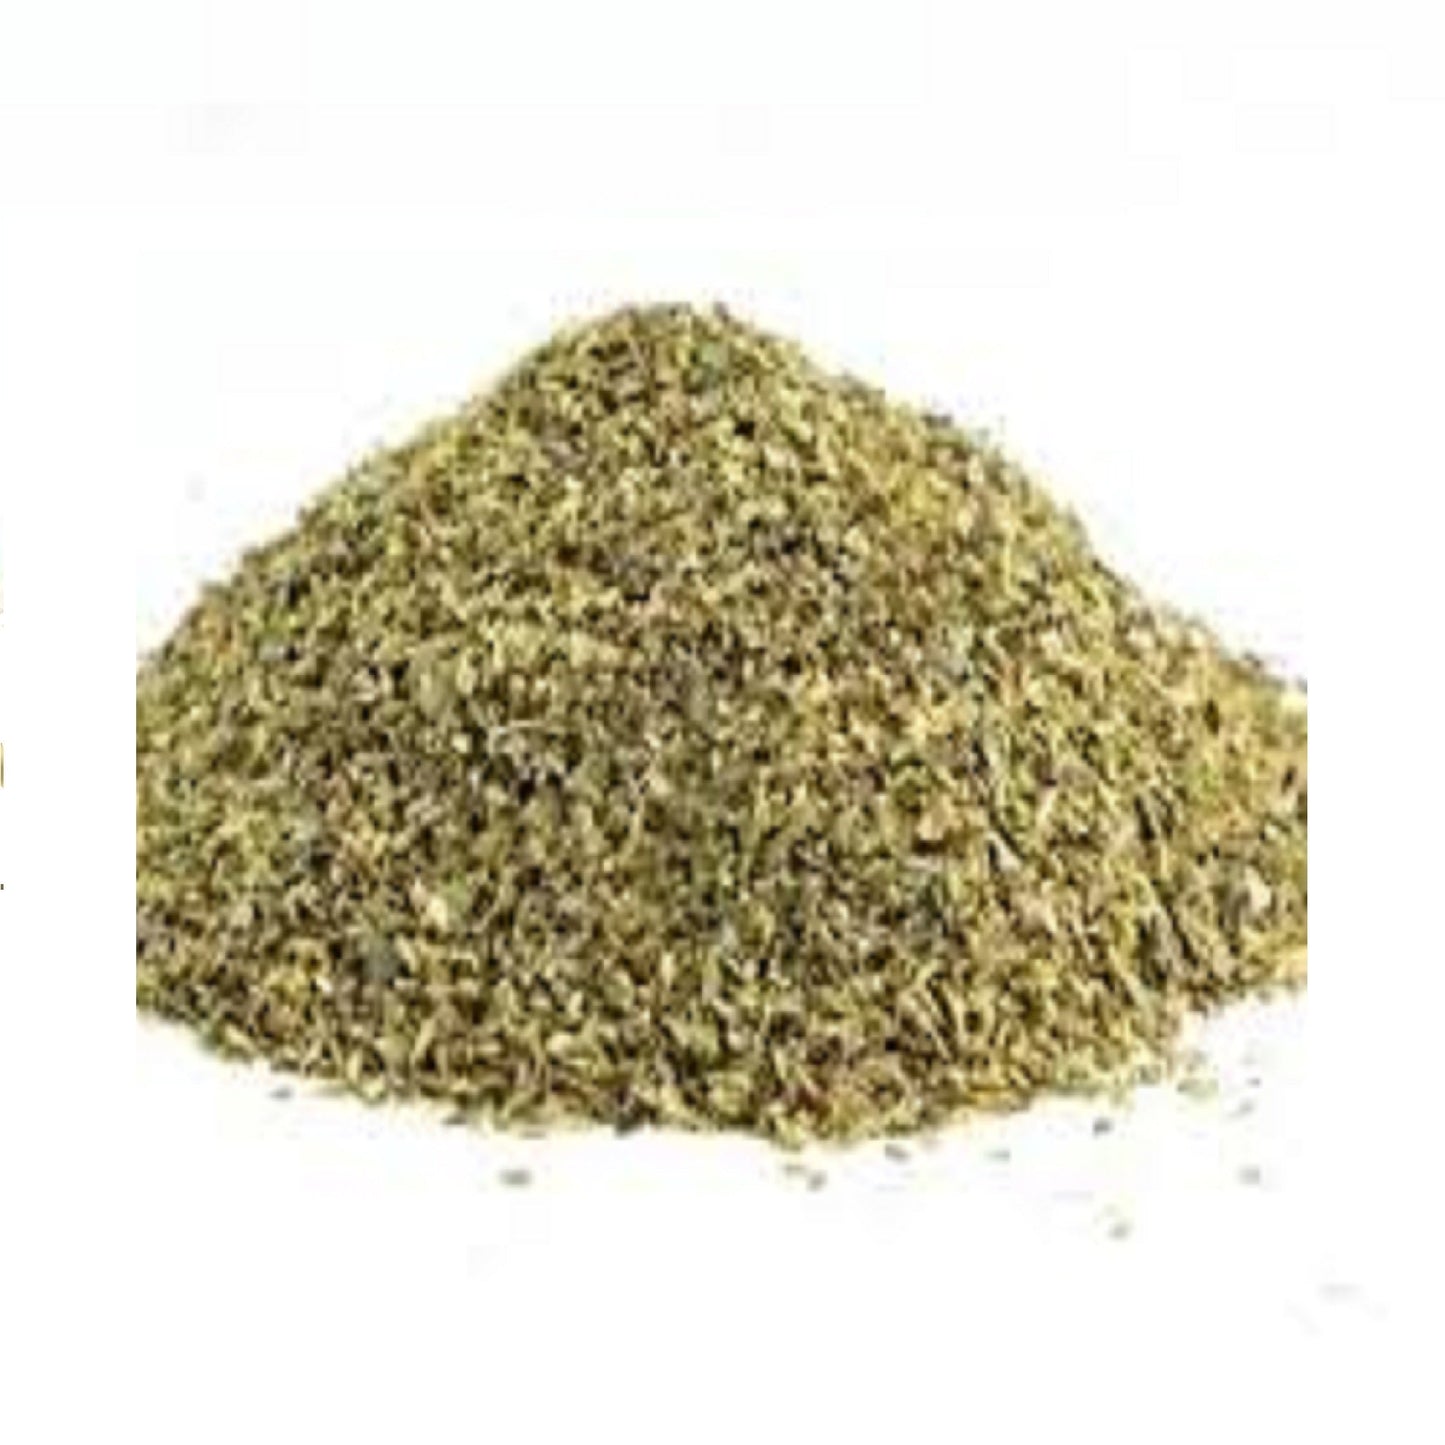 Natural Oregano: A Unique and Aromatic Herb from the High Mountains of Greece, Dry by Alpha Omega Imports